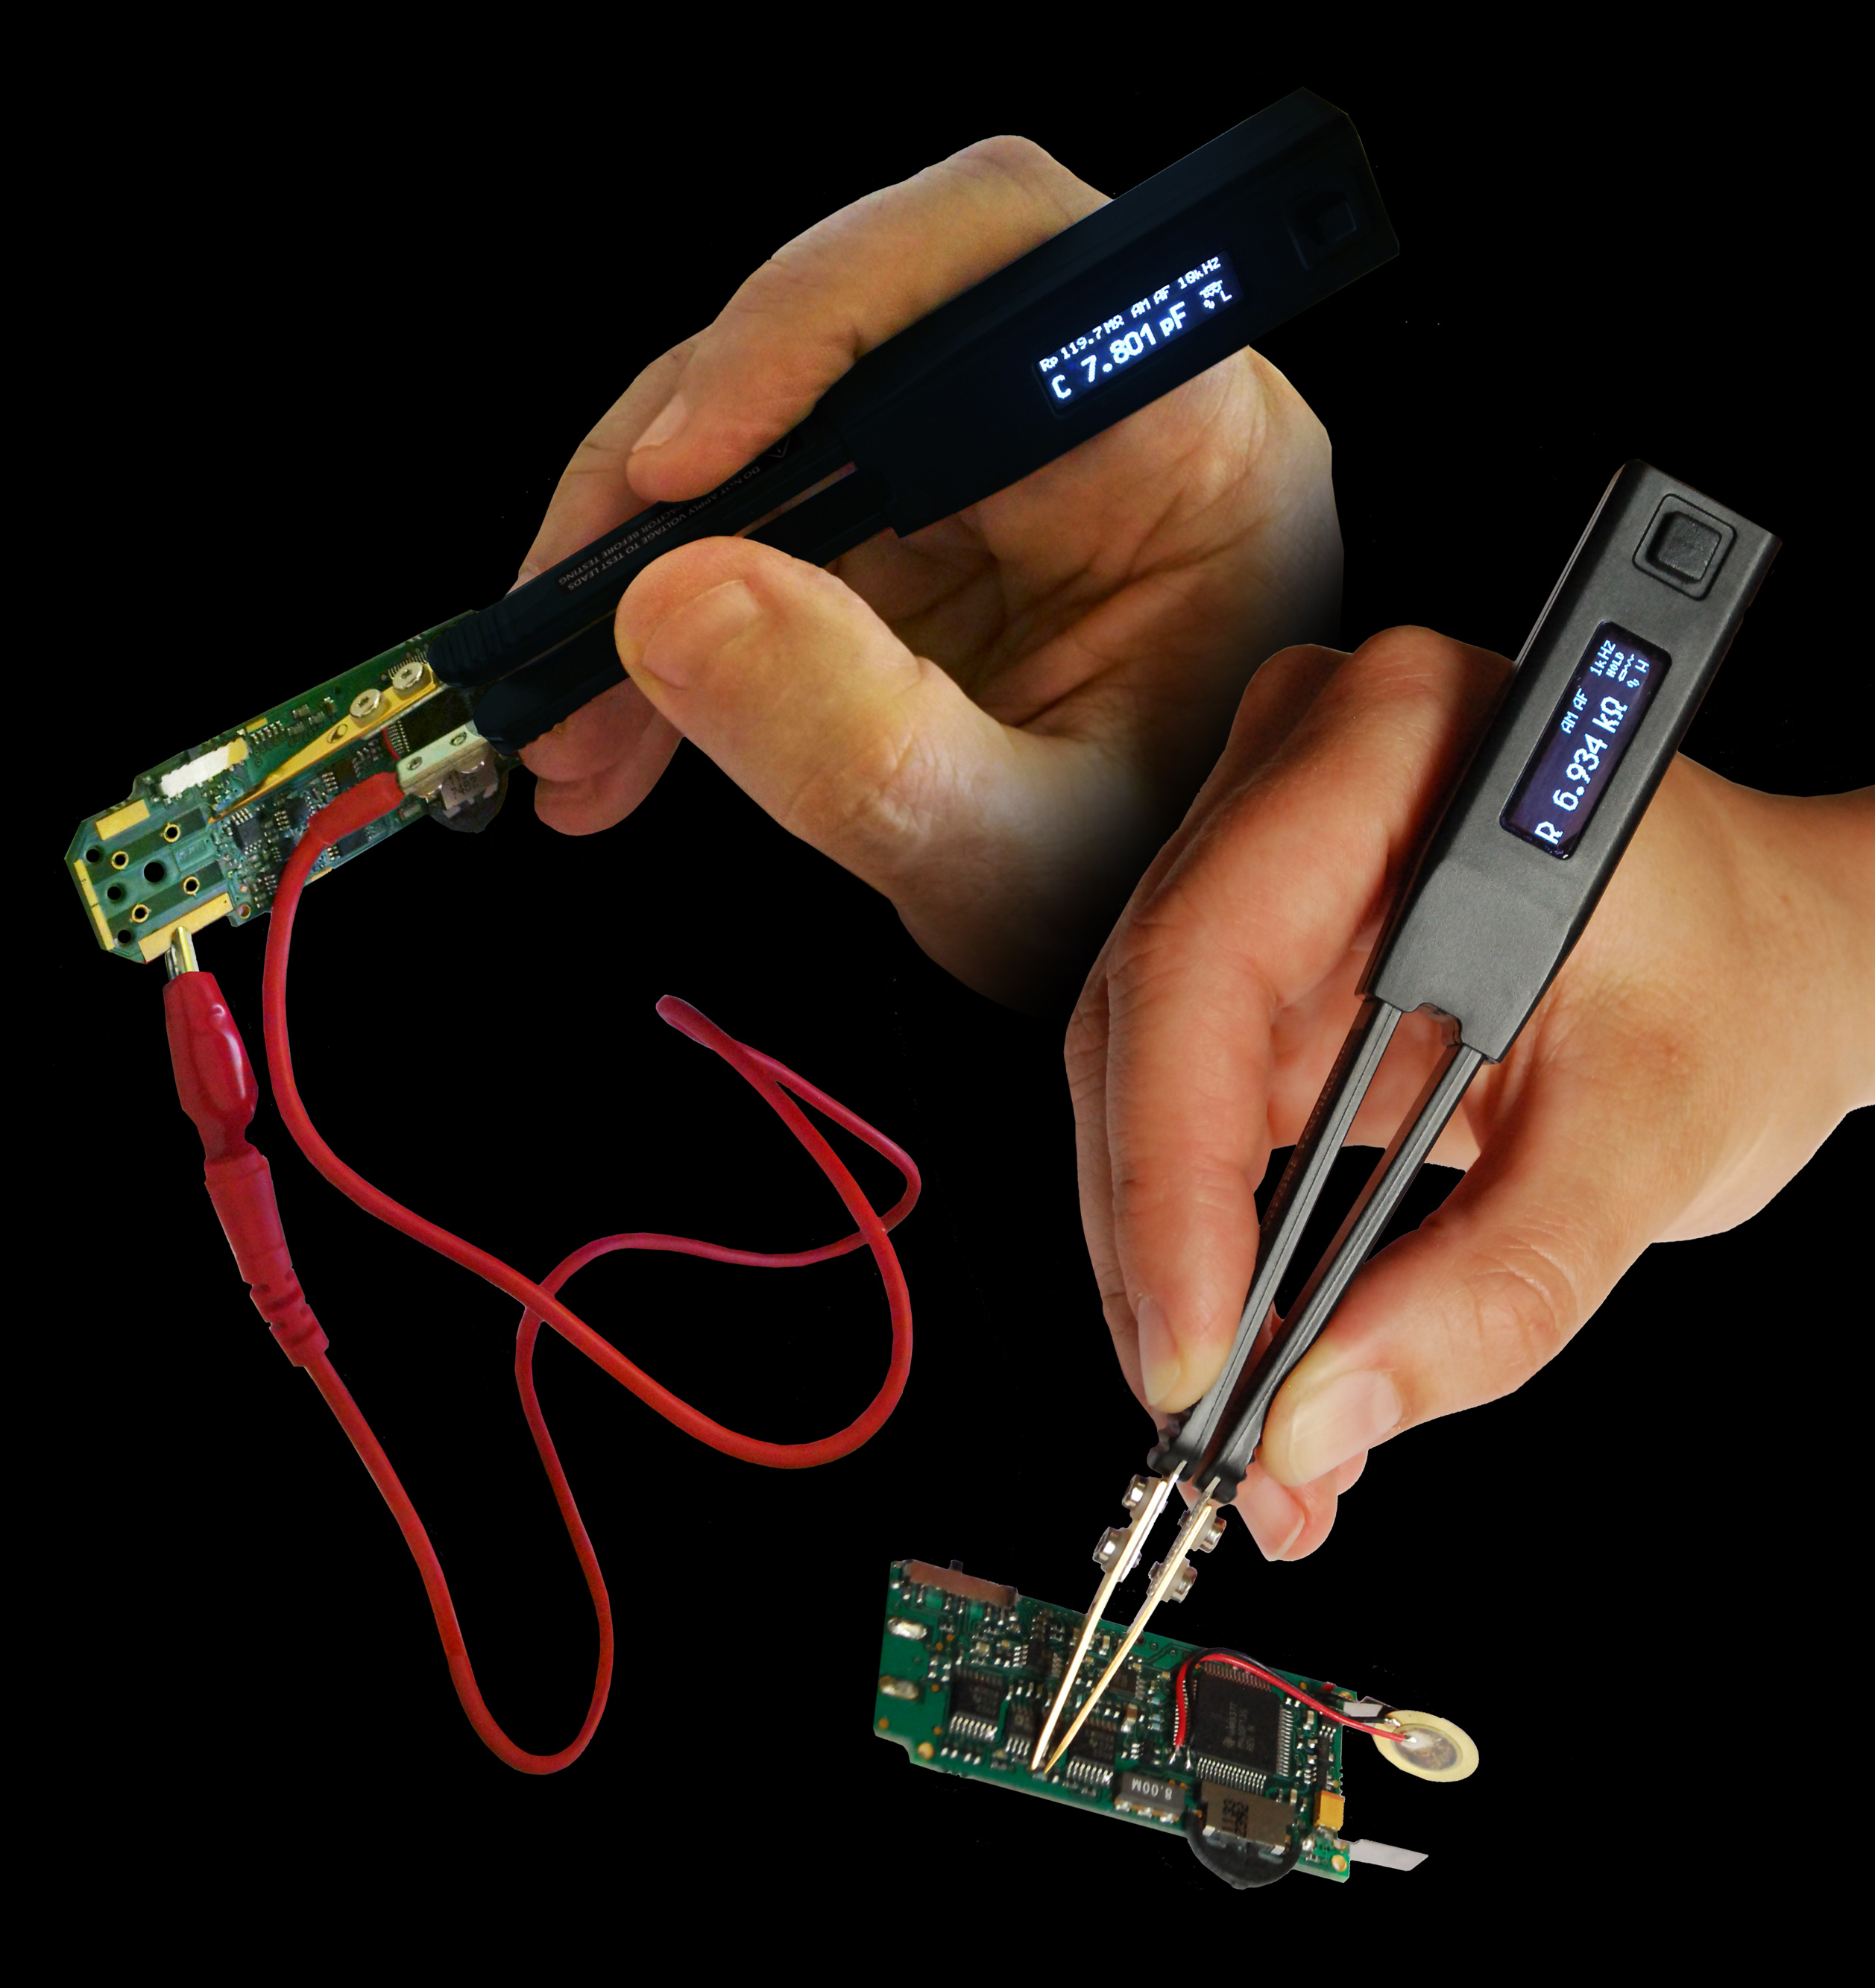 LCR-Reader and LCR-Reader Probe Connector